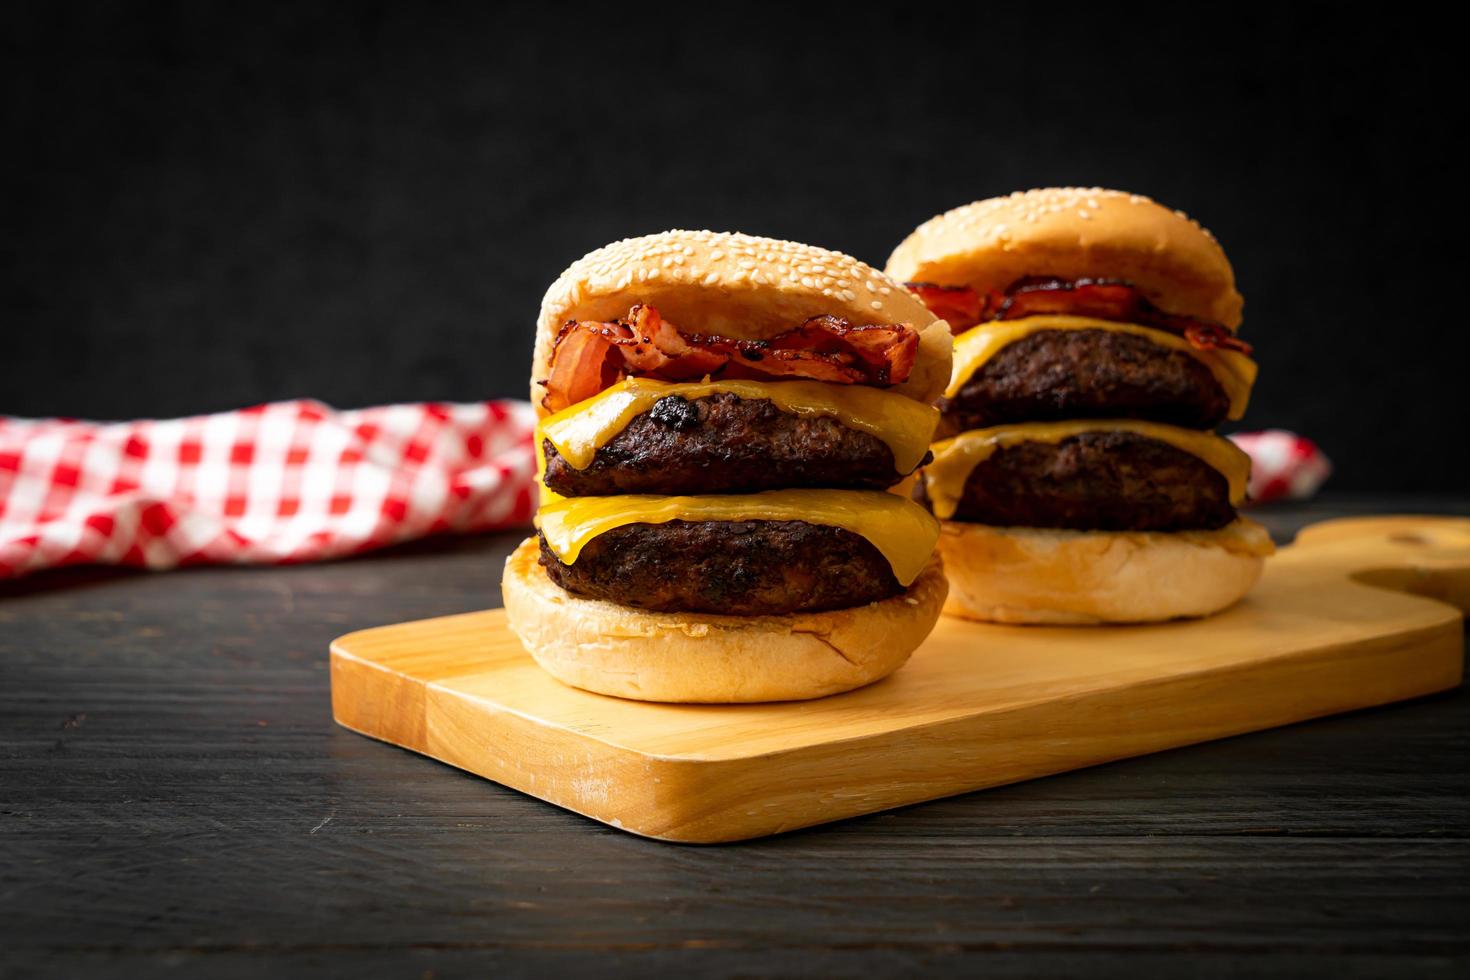 Hamburger or beef burgers with cheese and bacon - unhealthy food style photo